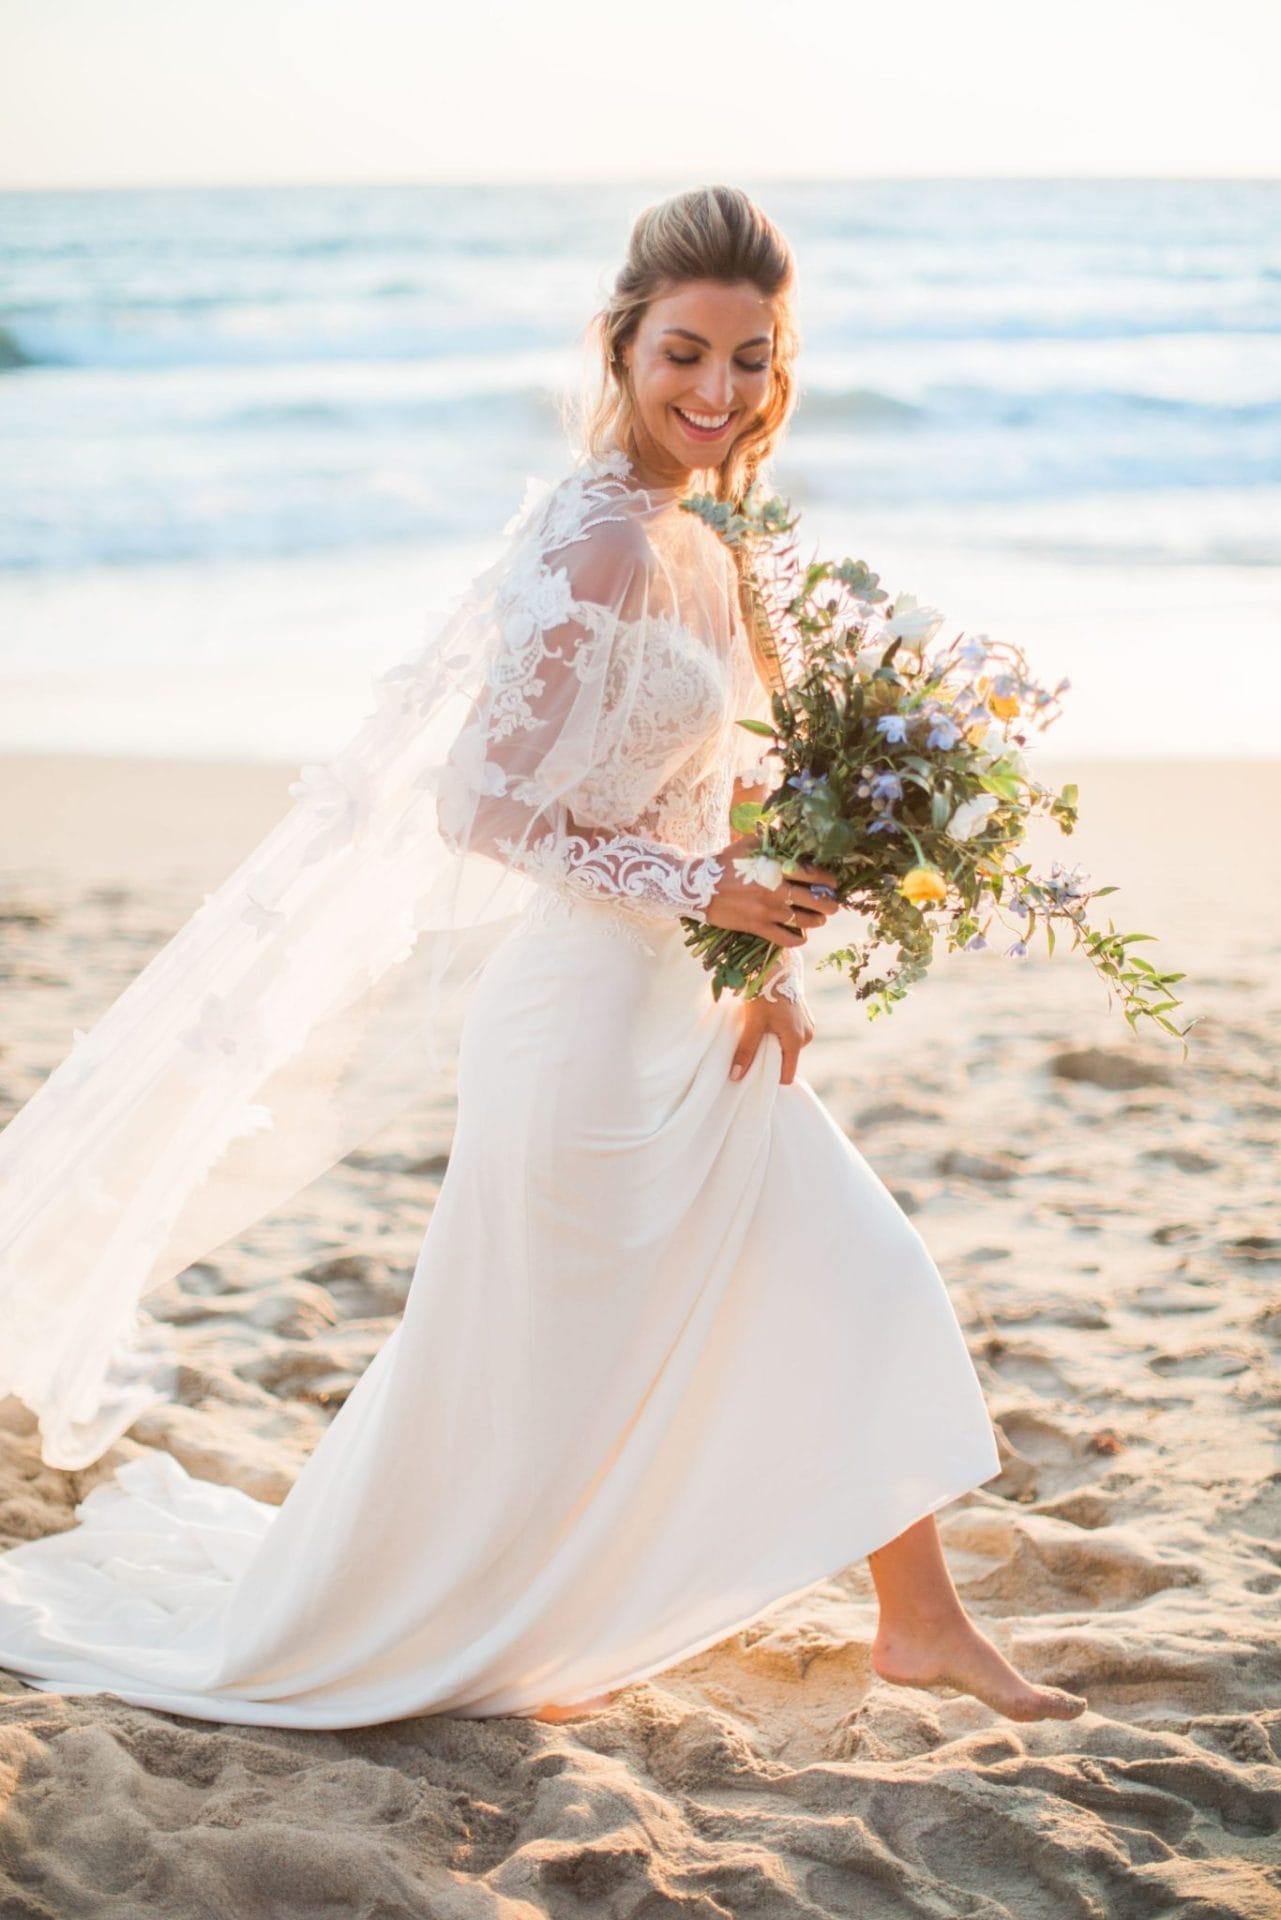 A bride walking on the beach holding her wedding bouquet at a picturesque wedding venue in Laguna Beach, Southern California.